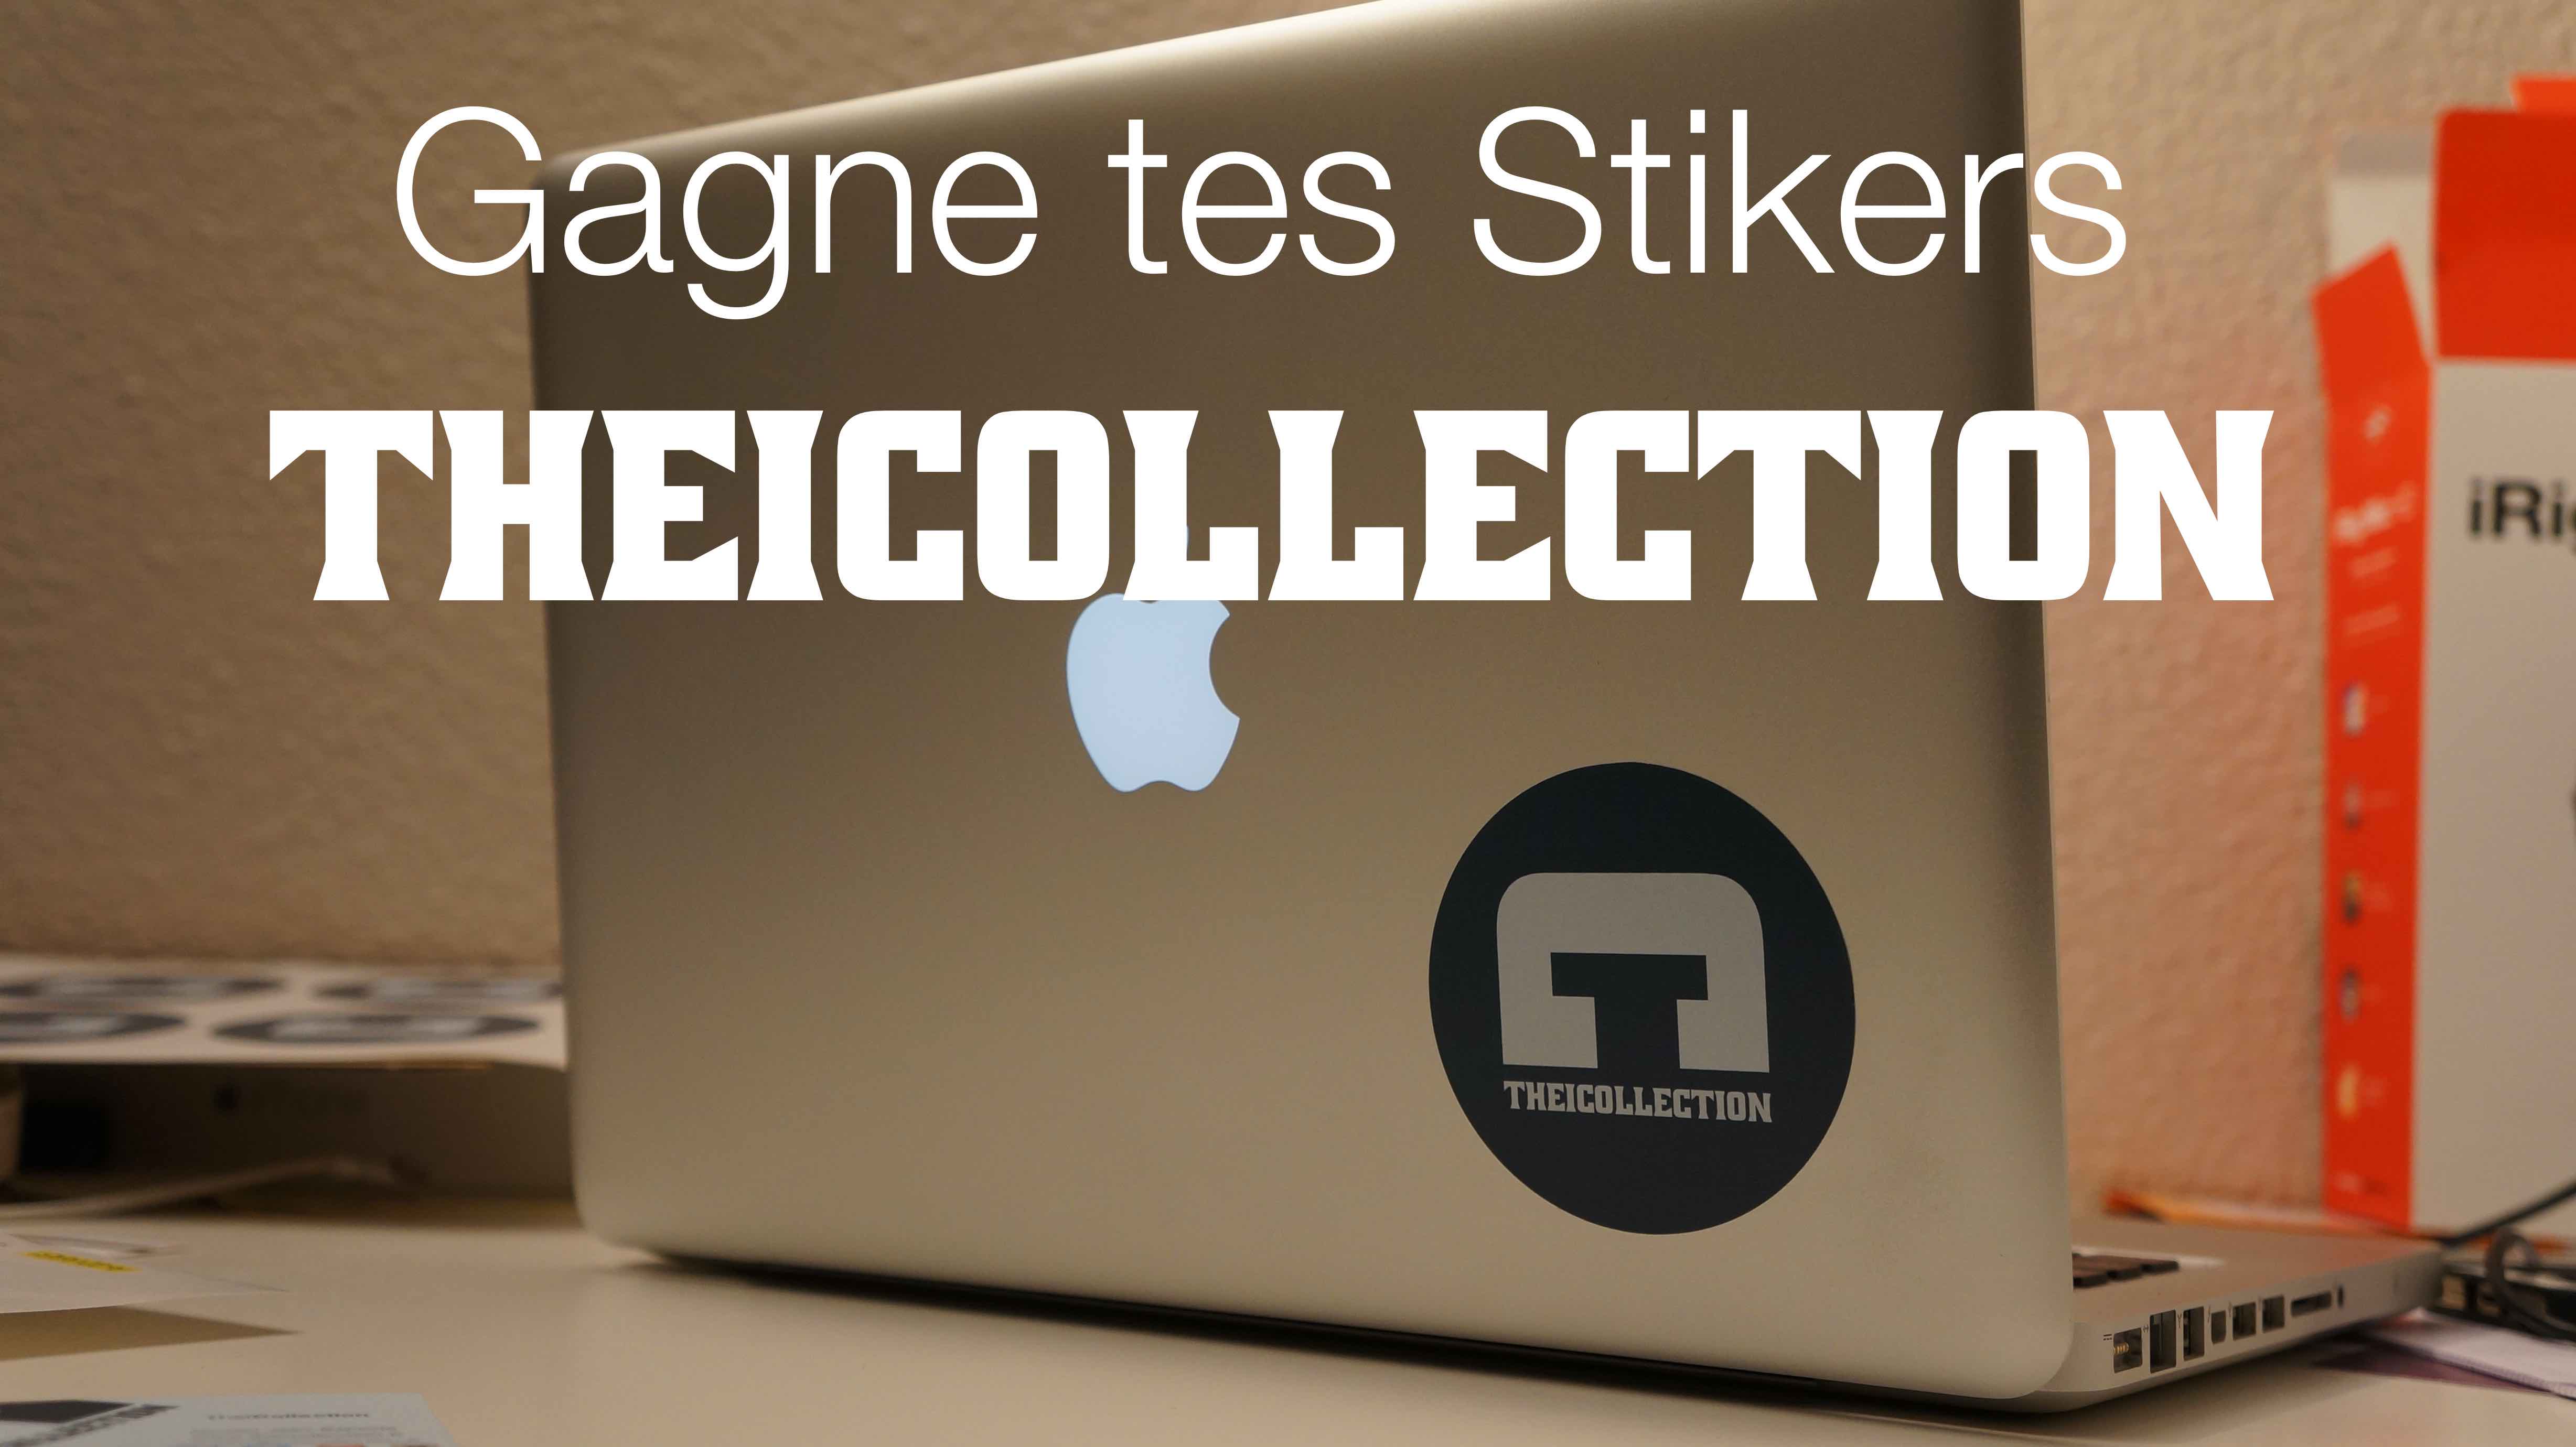 Concours – Gagner des stikers TheiCollection